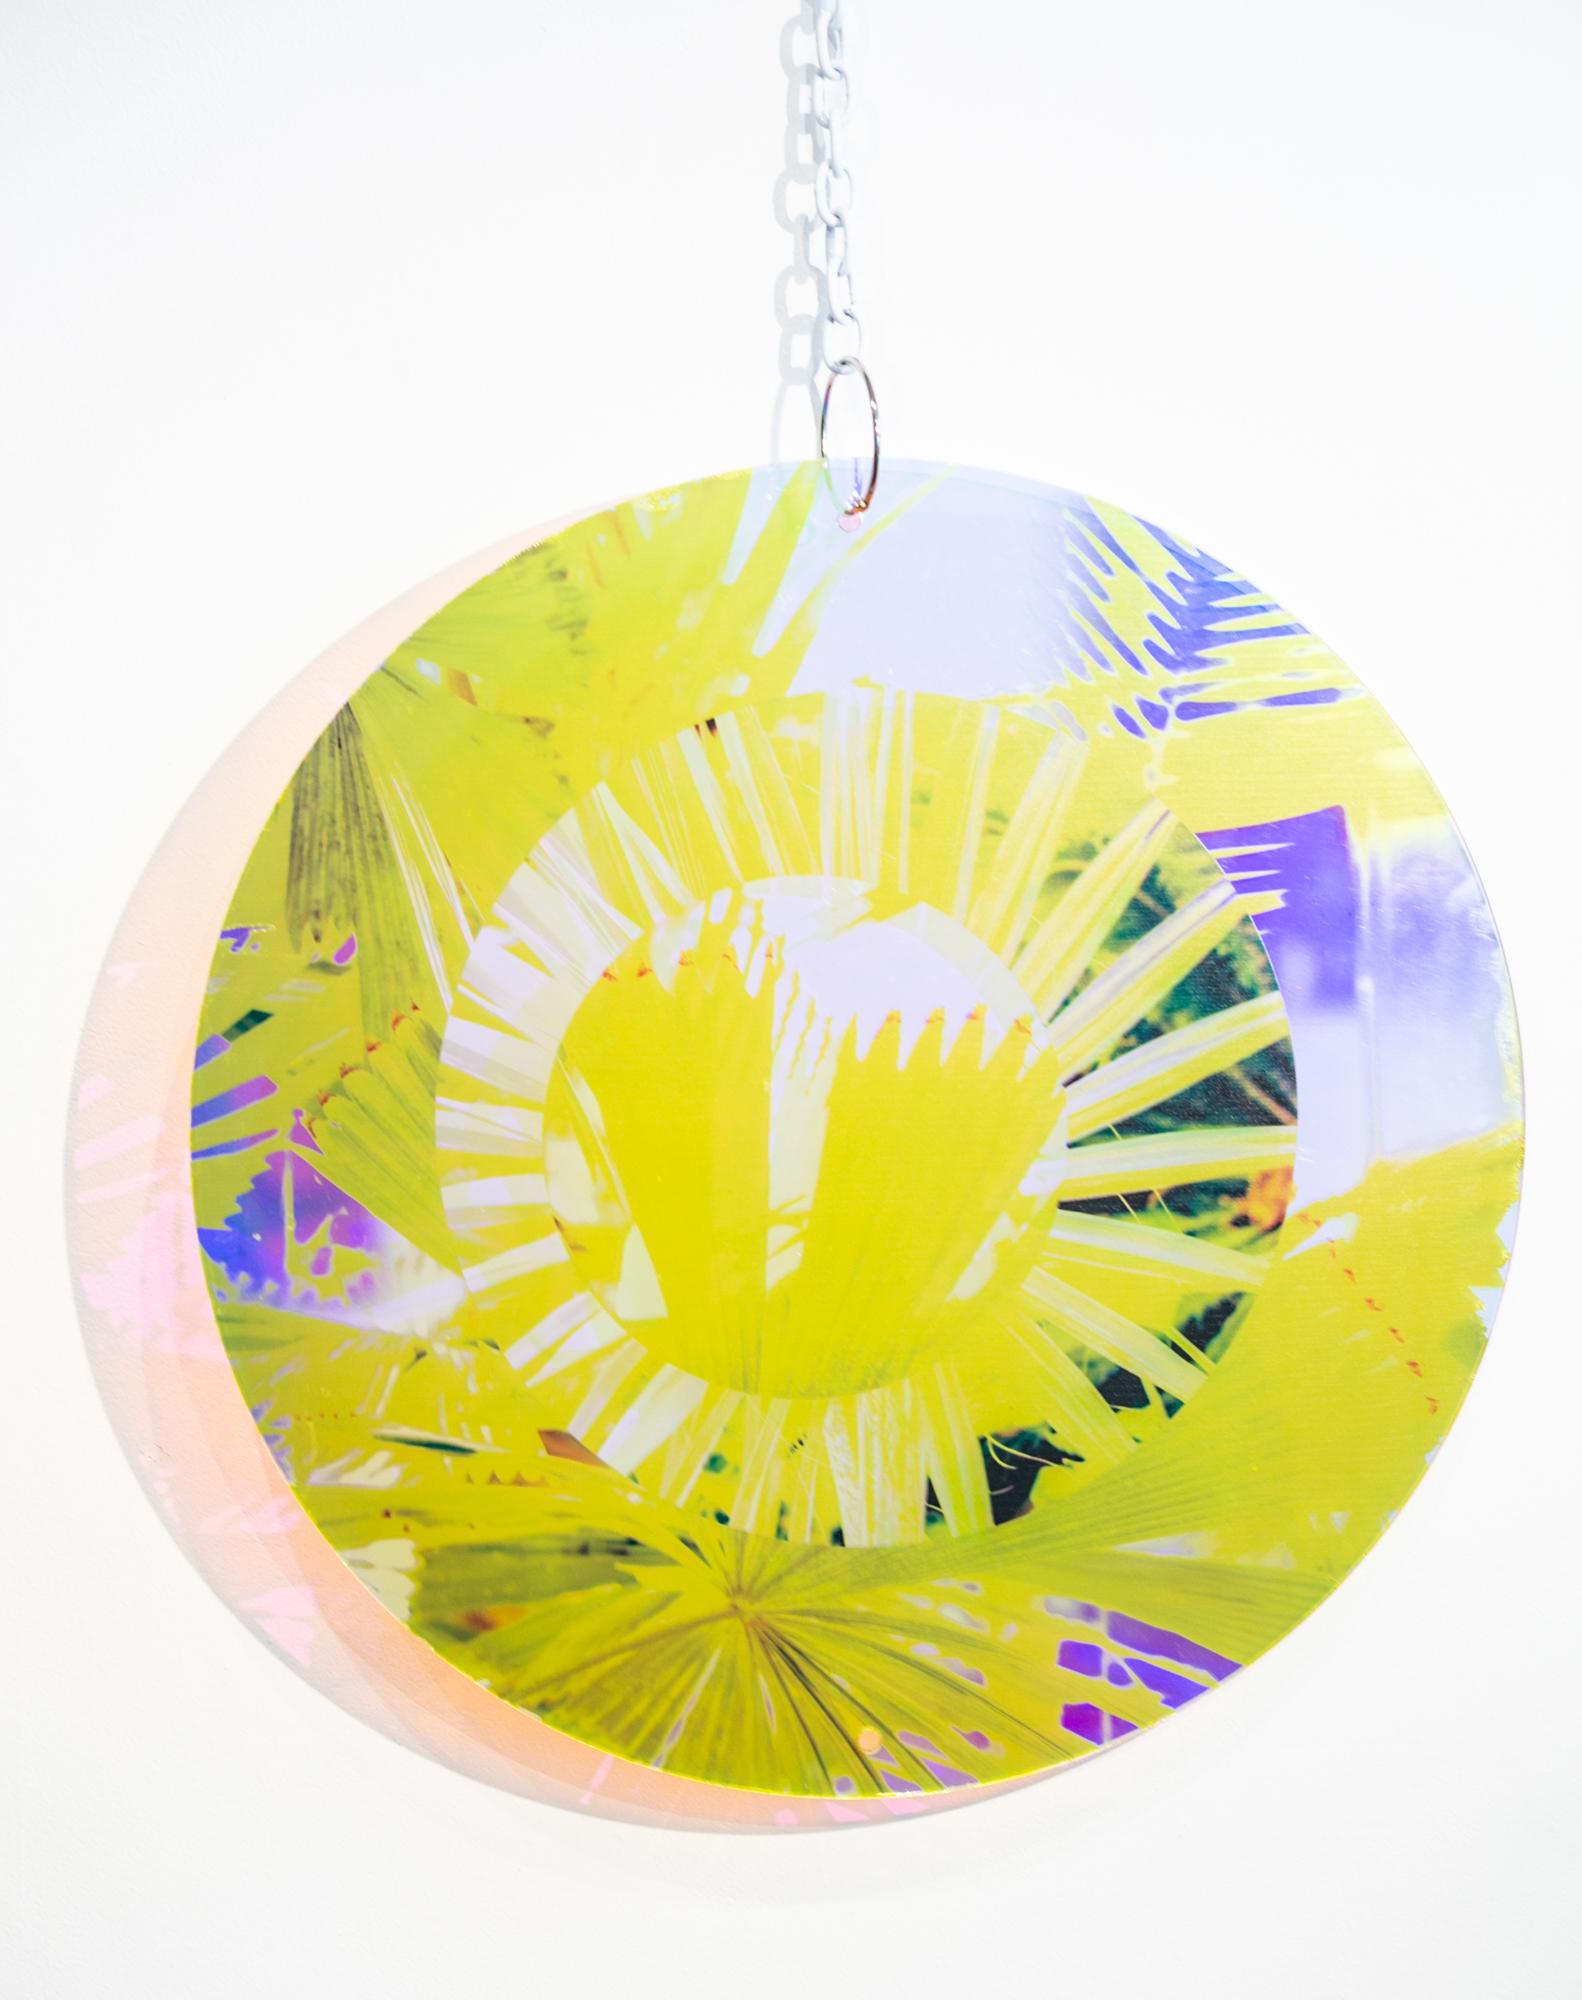 Roxana Azar Abstract Sculpture - "Circle III", Abstract Wall-Hanging Sculpture, Colorful Suspended Sculpture